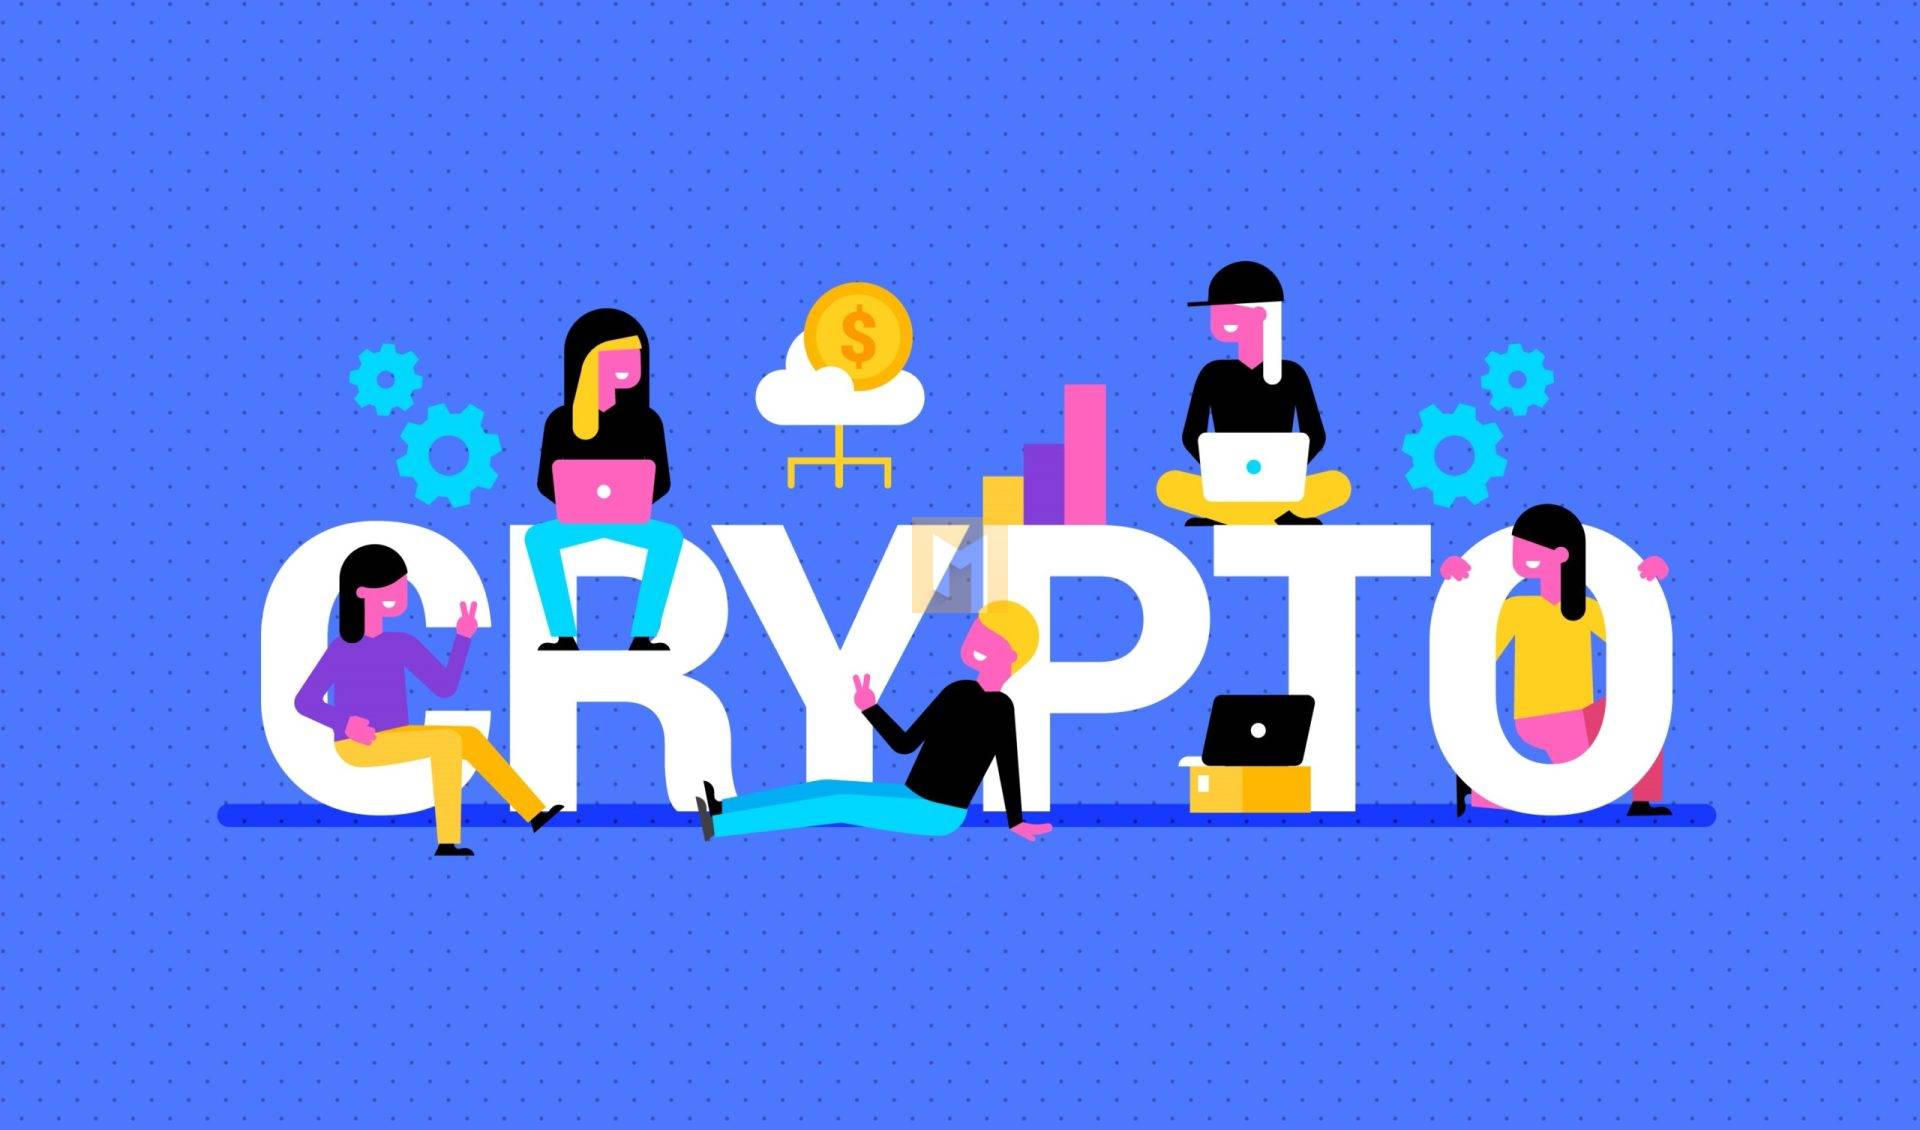 How to Create a Cryptocurrency: Step-by-Step Guide